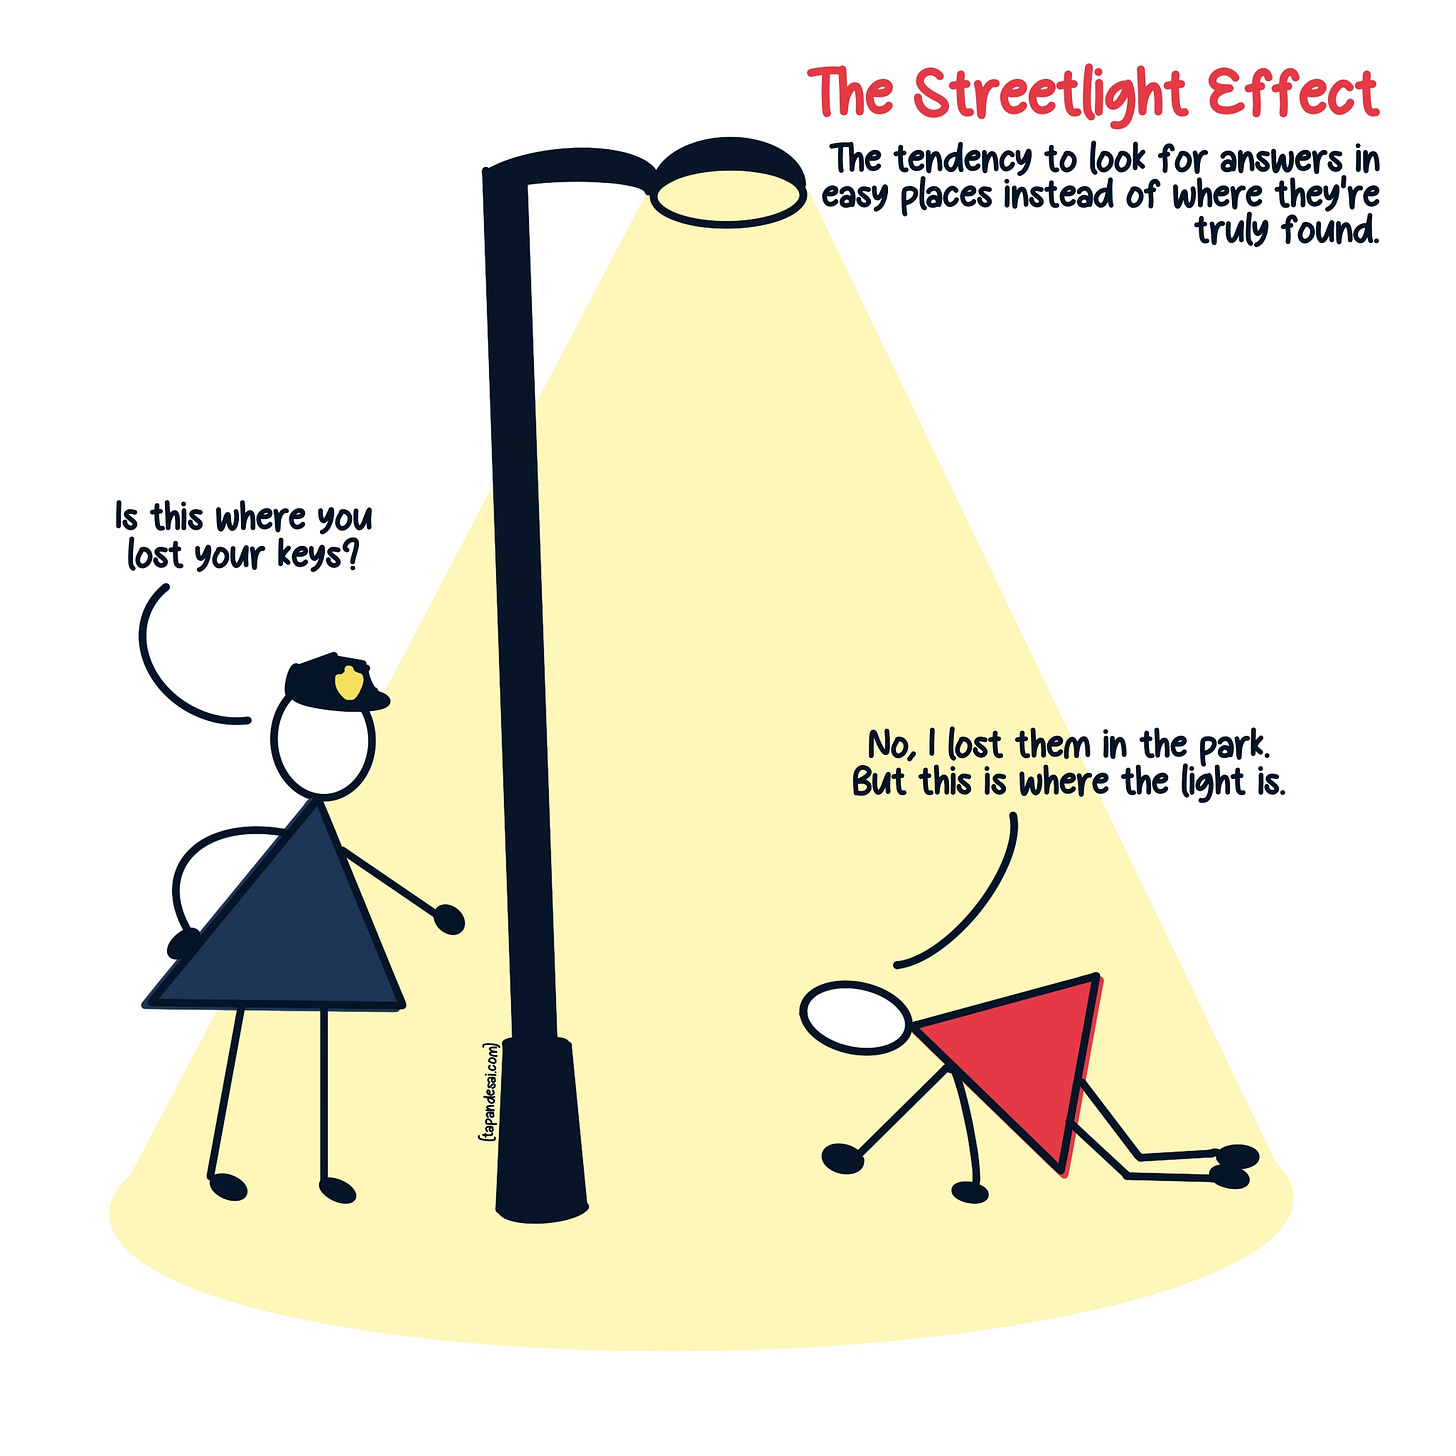 The Streetlight Effect explained through an image of a person searching for keys under the streetlight.